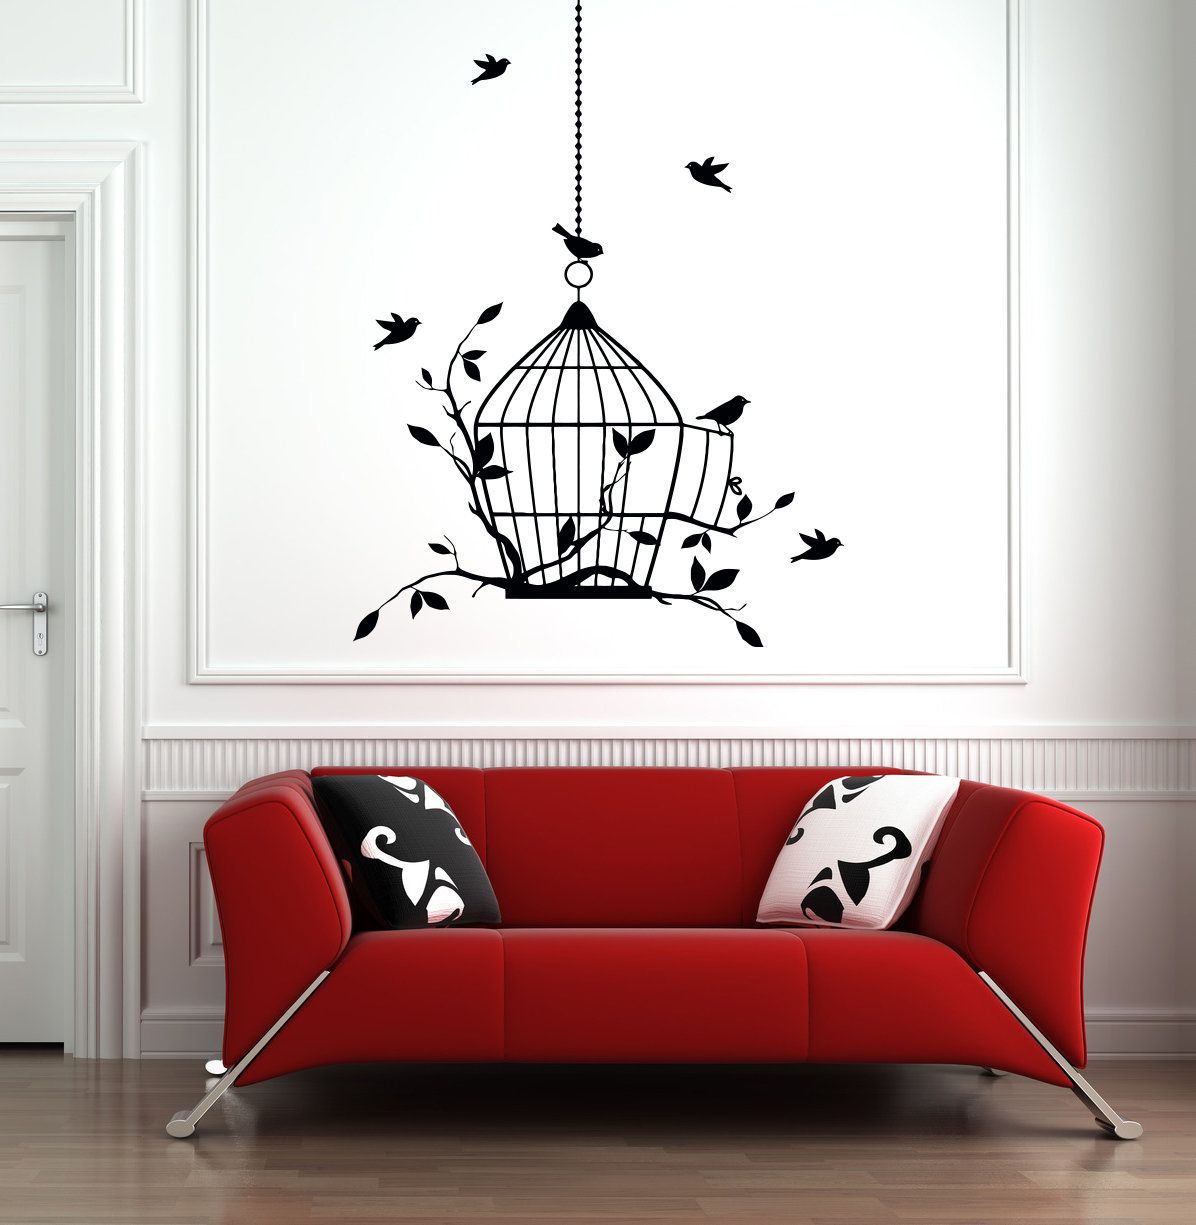 Tree Branch Wall Decal Bird Cage Wall Decal Birds Wall – Etsy Within 2017 Bird On Tree Branch Wall Art (Gallery 10 of 20)